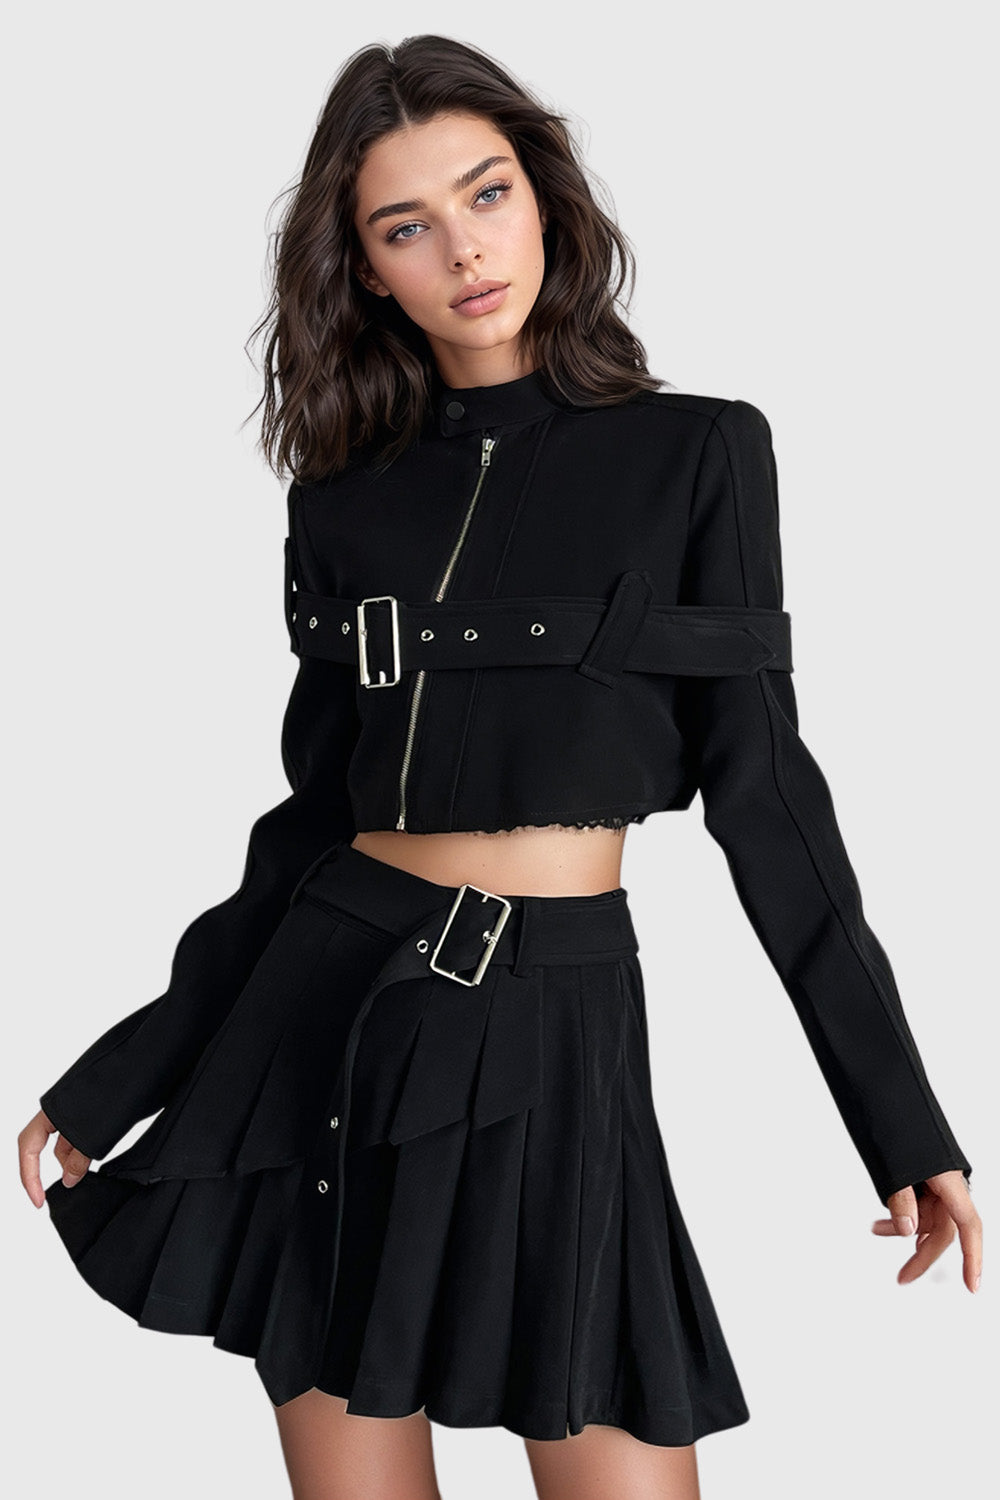 Belted 2-Piece Set with Jacket and Skirt - Black